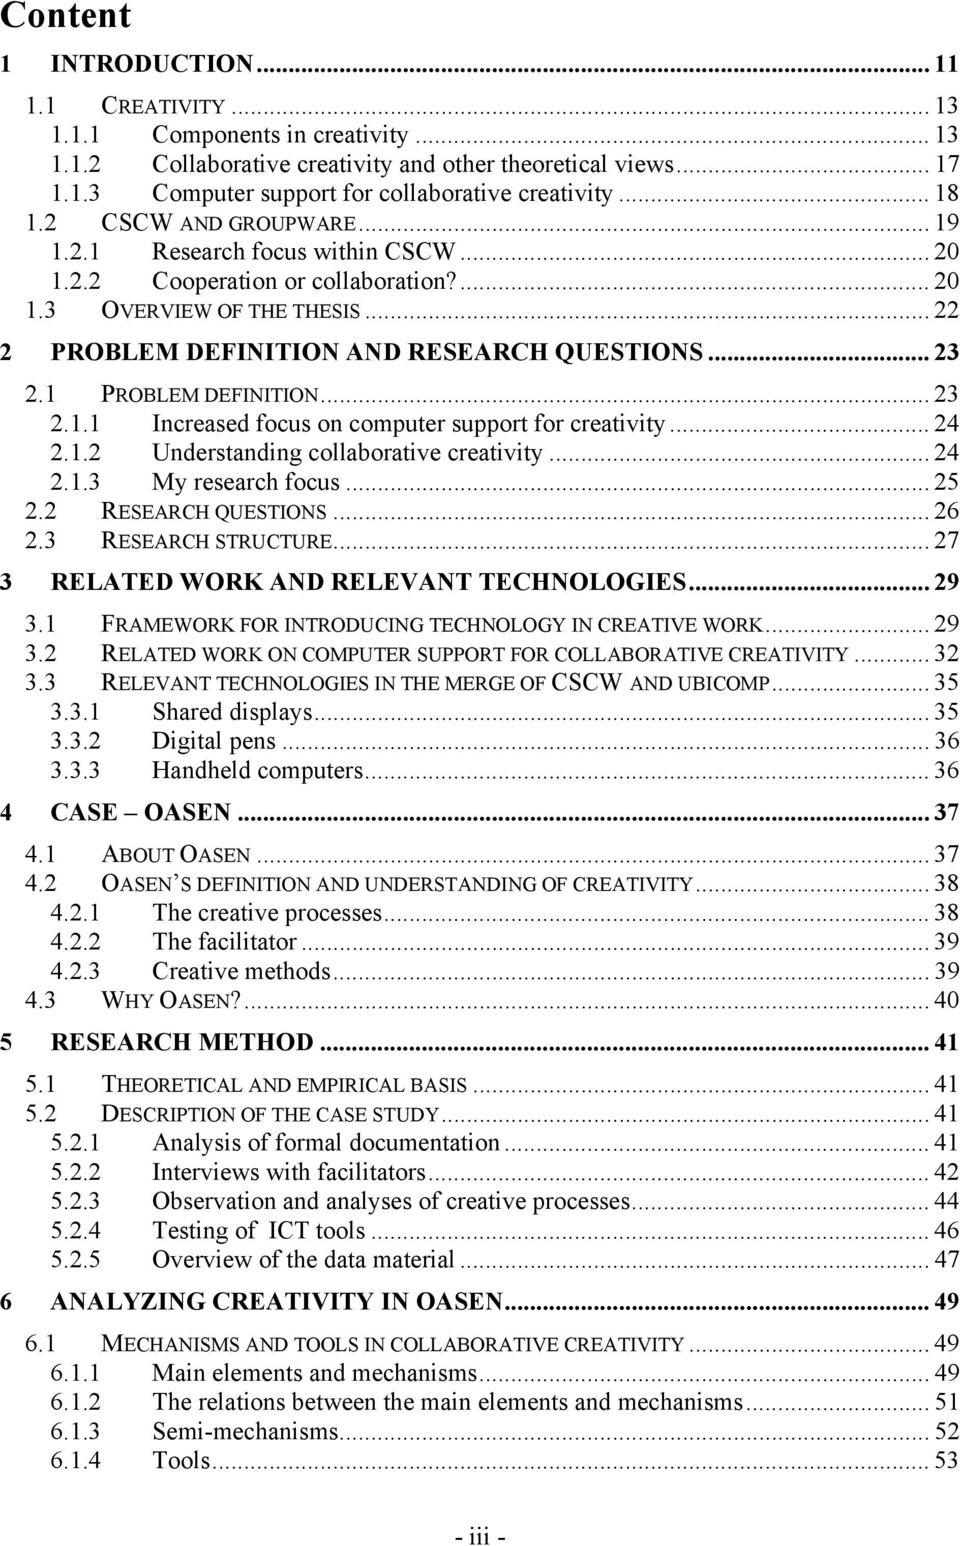 1 PROBLEM DEFINITION... 23 2.1.1 Increased focus on computer support for creativity... 24 2.1.2 Understanding collaborative creativity... 24 2.1.3 My research focus... 25 2.2 RESEARCH QUESTIONS... 26 2.